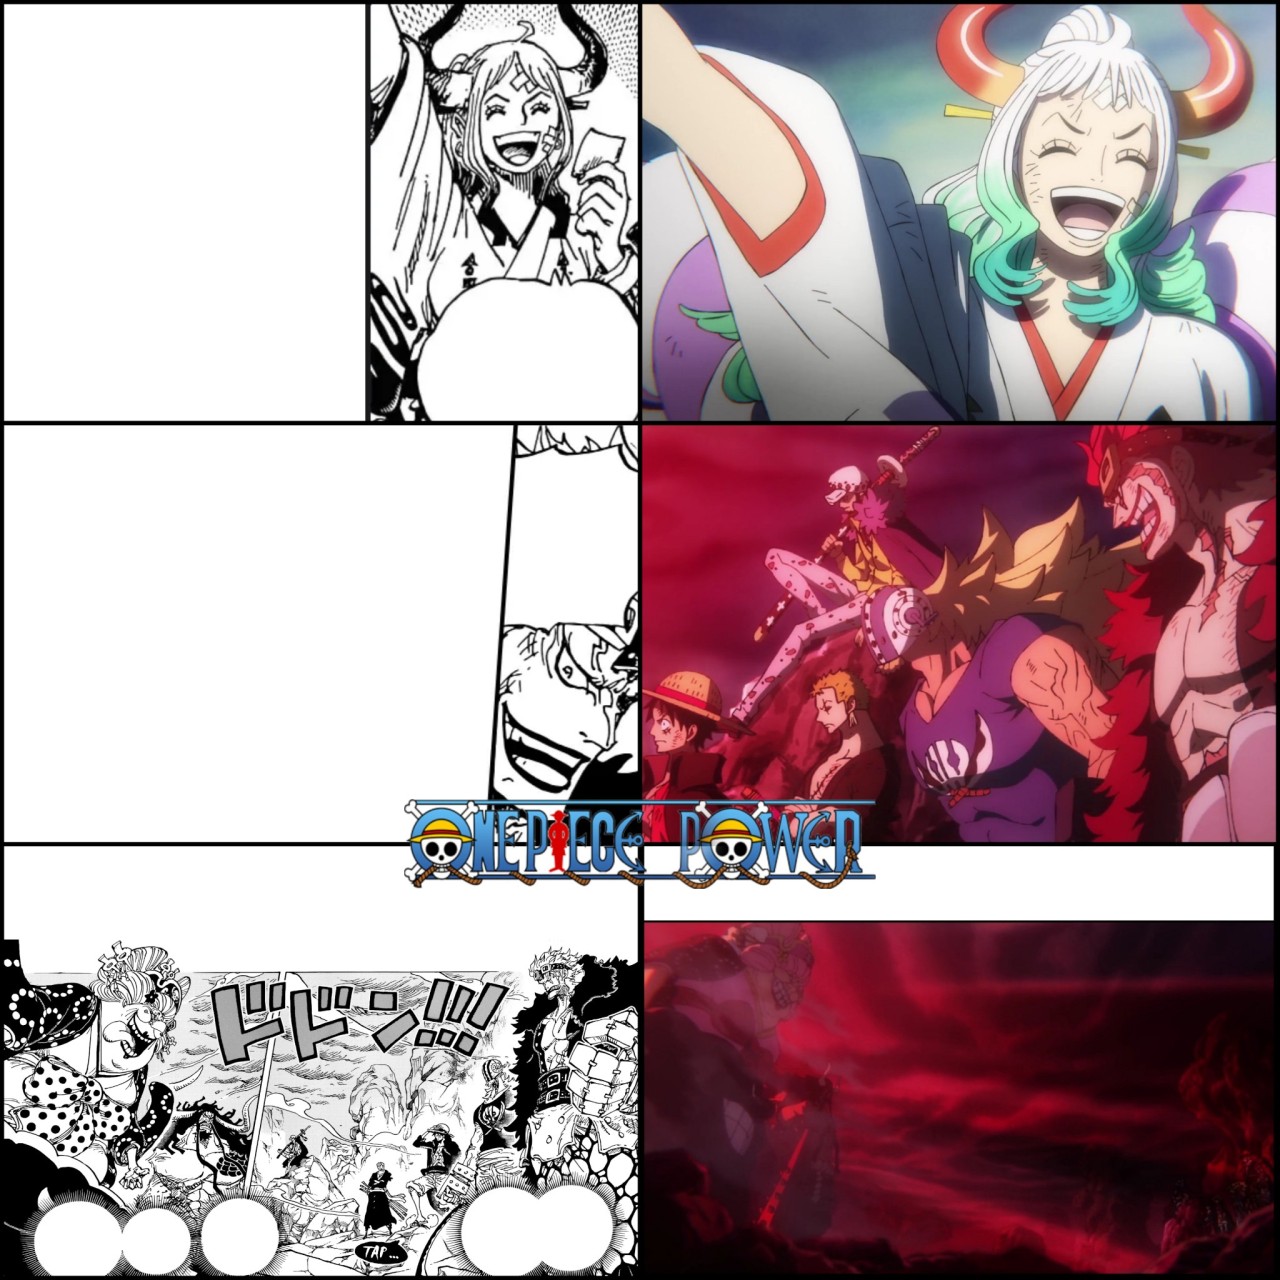 ONE PIECE Opening 1 We Are - Episode 1000 Comparison 